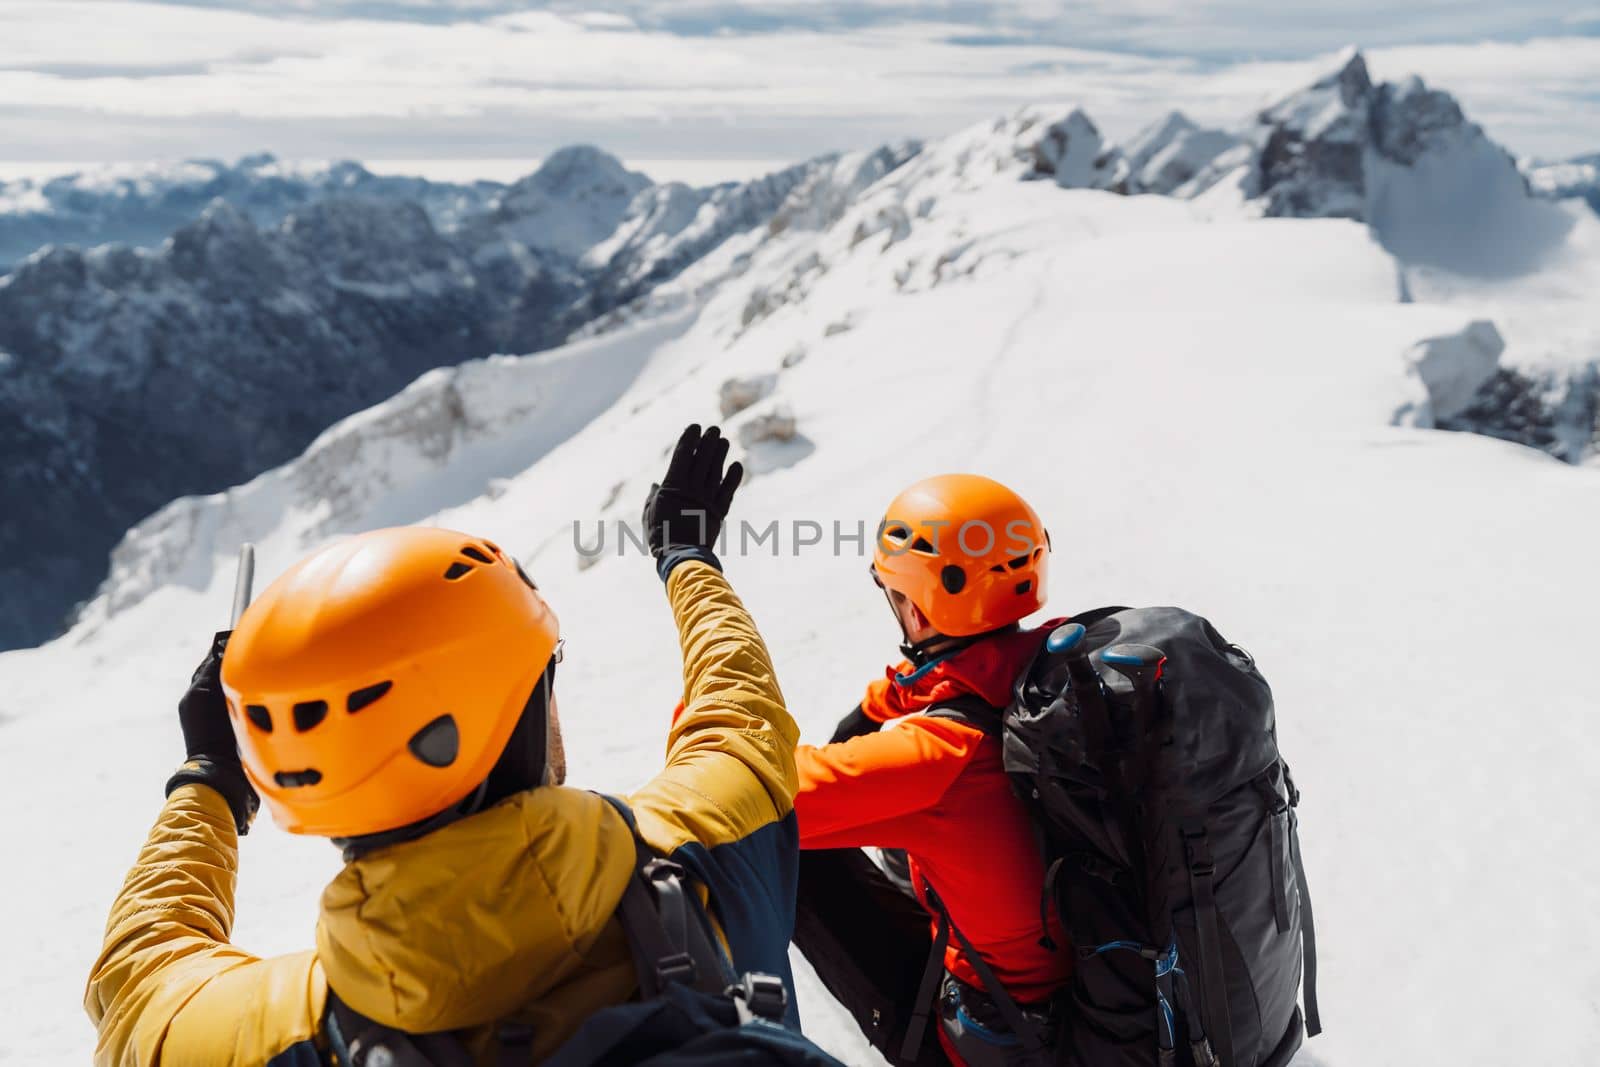 Mountaineer backcountry ski touring in the mountains. Ski touring in high alpine landscape with snowy trees. Adventure winter extreme sport. High quality photo